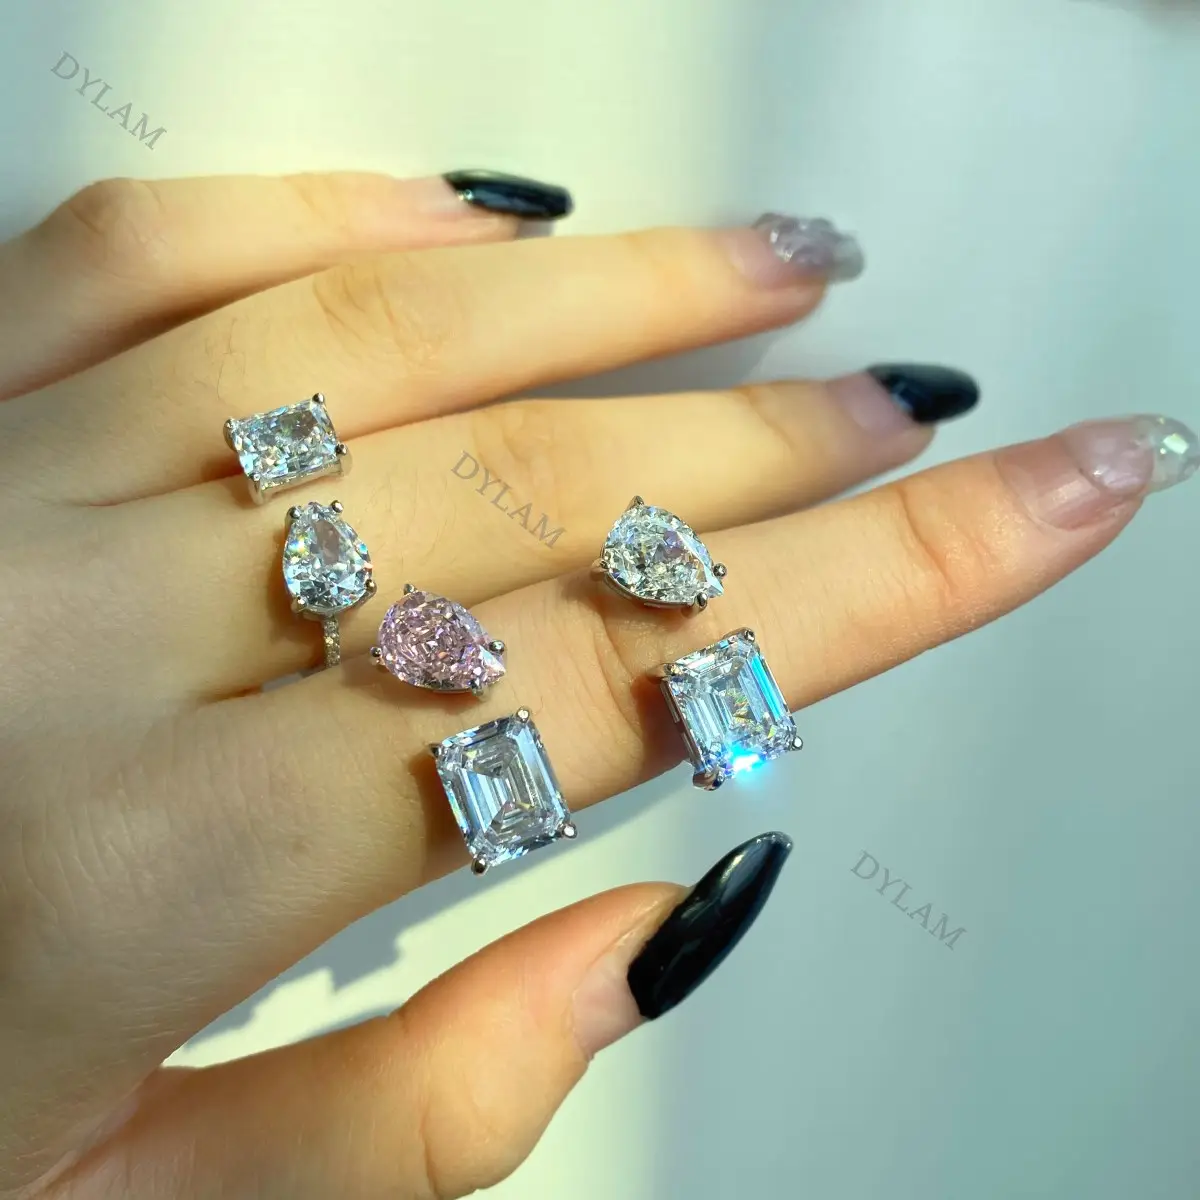 Dylam 2022 New Arrivals Same As Kylie Jenner 8A Cz Ice Flower Cut S925 Sterling Silver Rhodium Plated Adjustable Rings